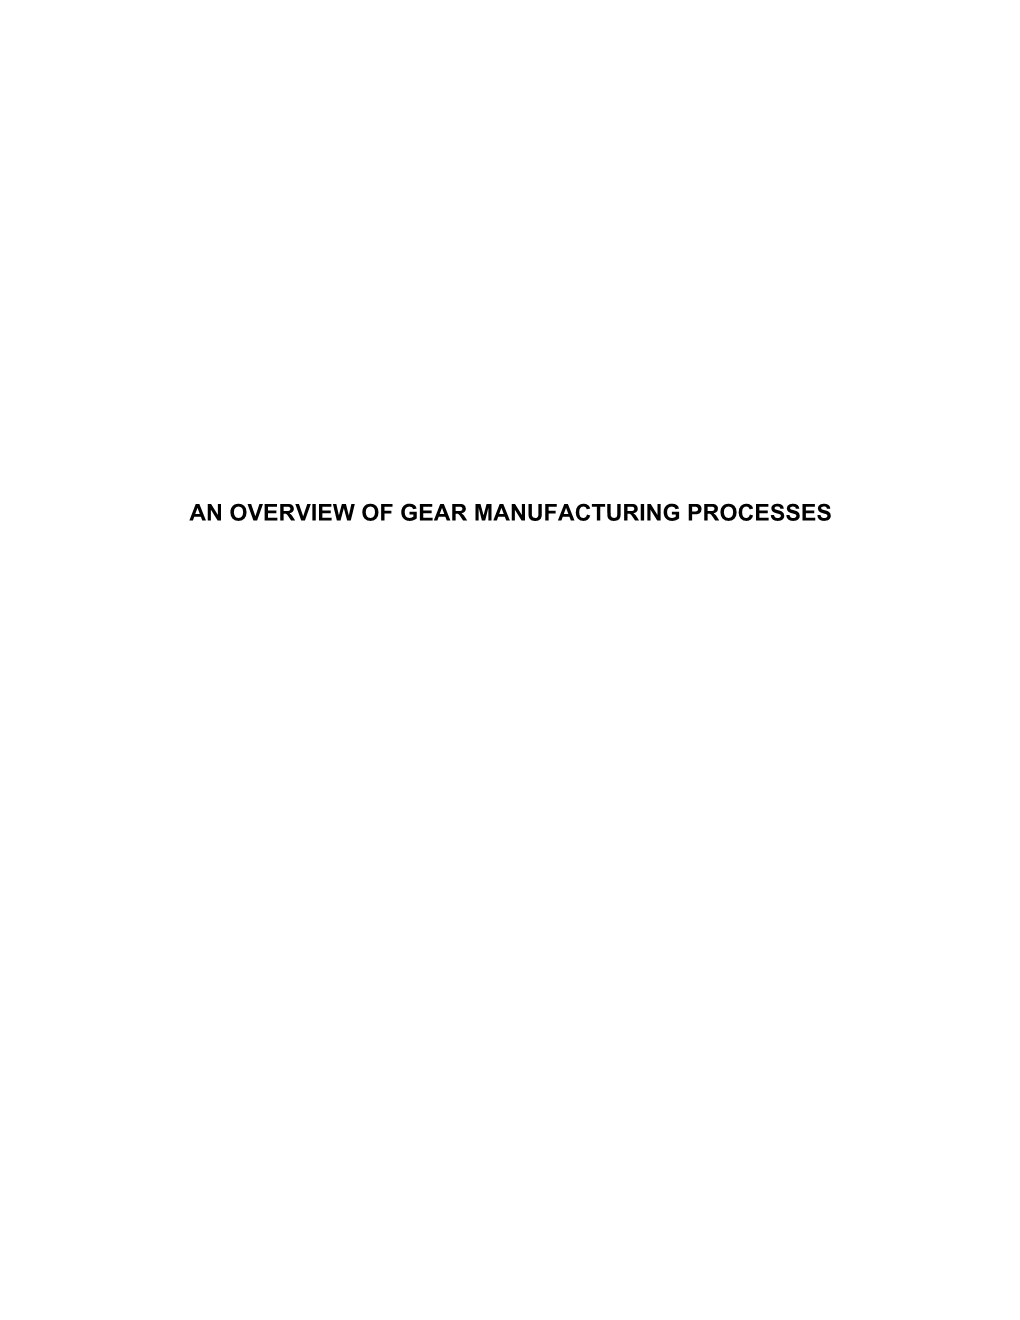 An Overview of Gear Manufacturing Processes